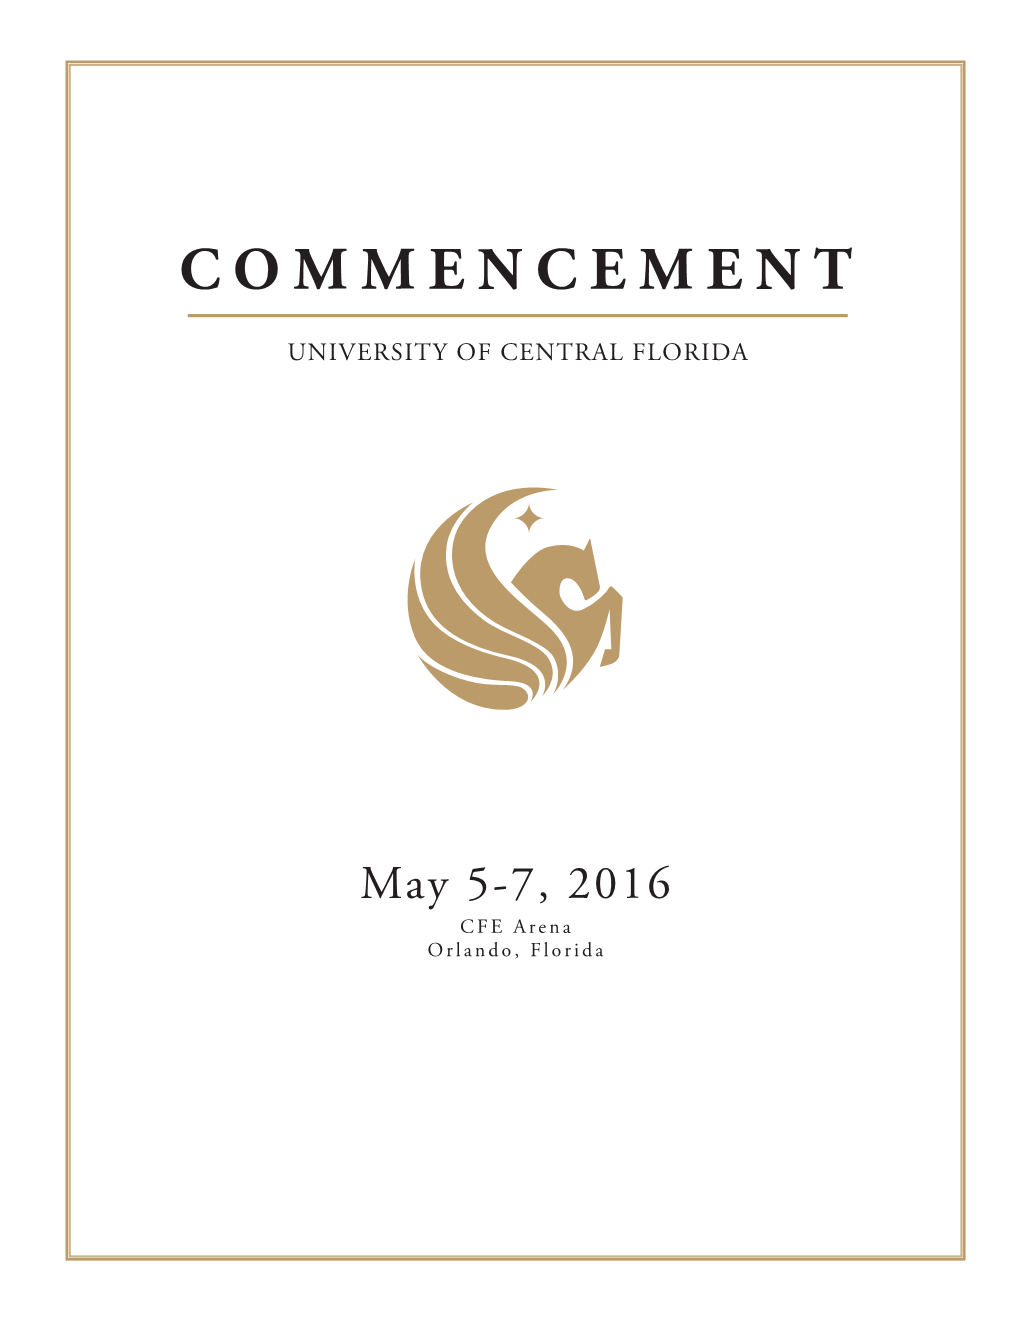 Commencement Program Will Be Available at for Download As a PDF Beginning Monday, May 9, 2016